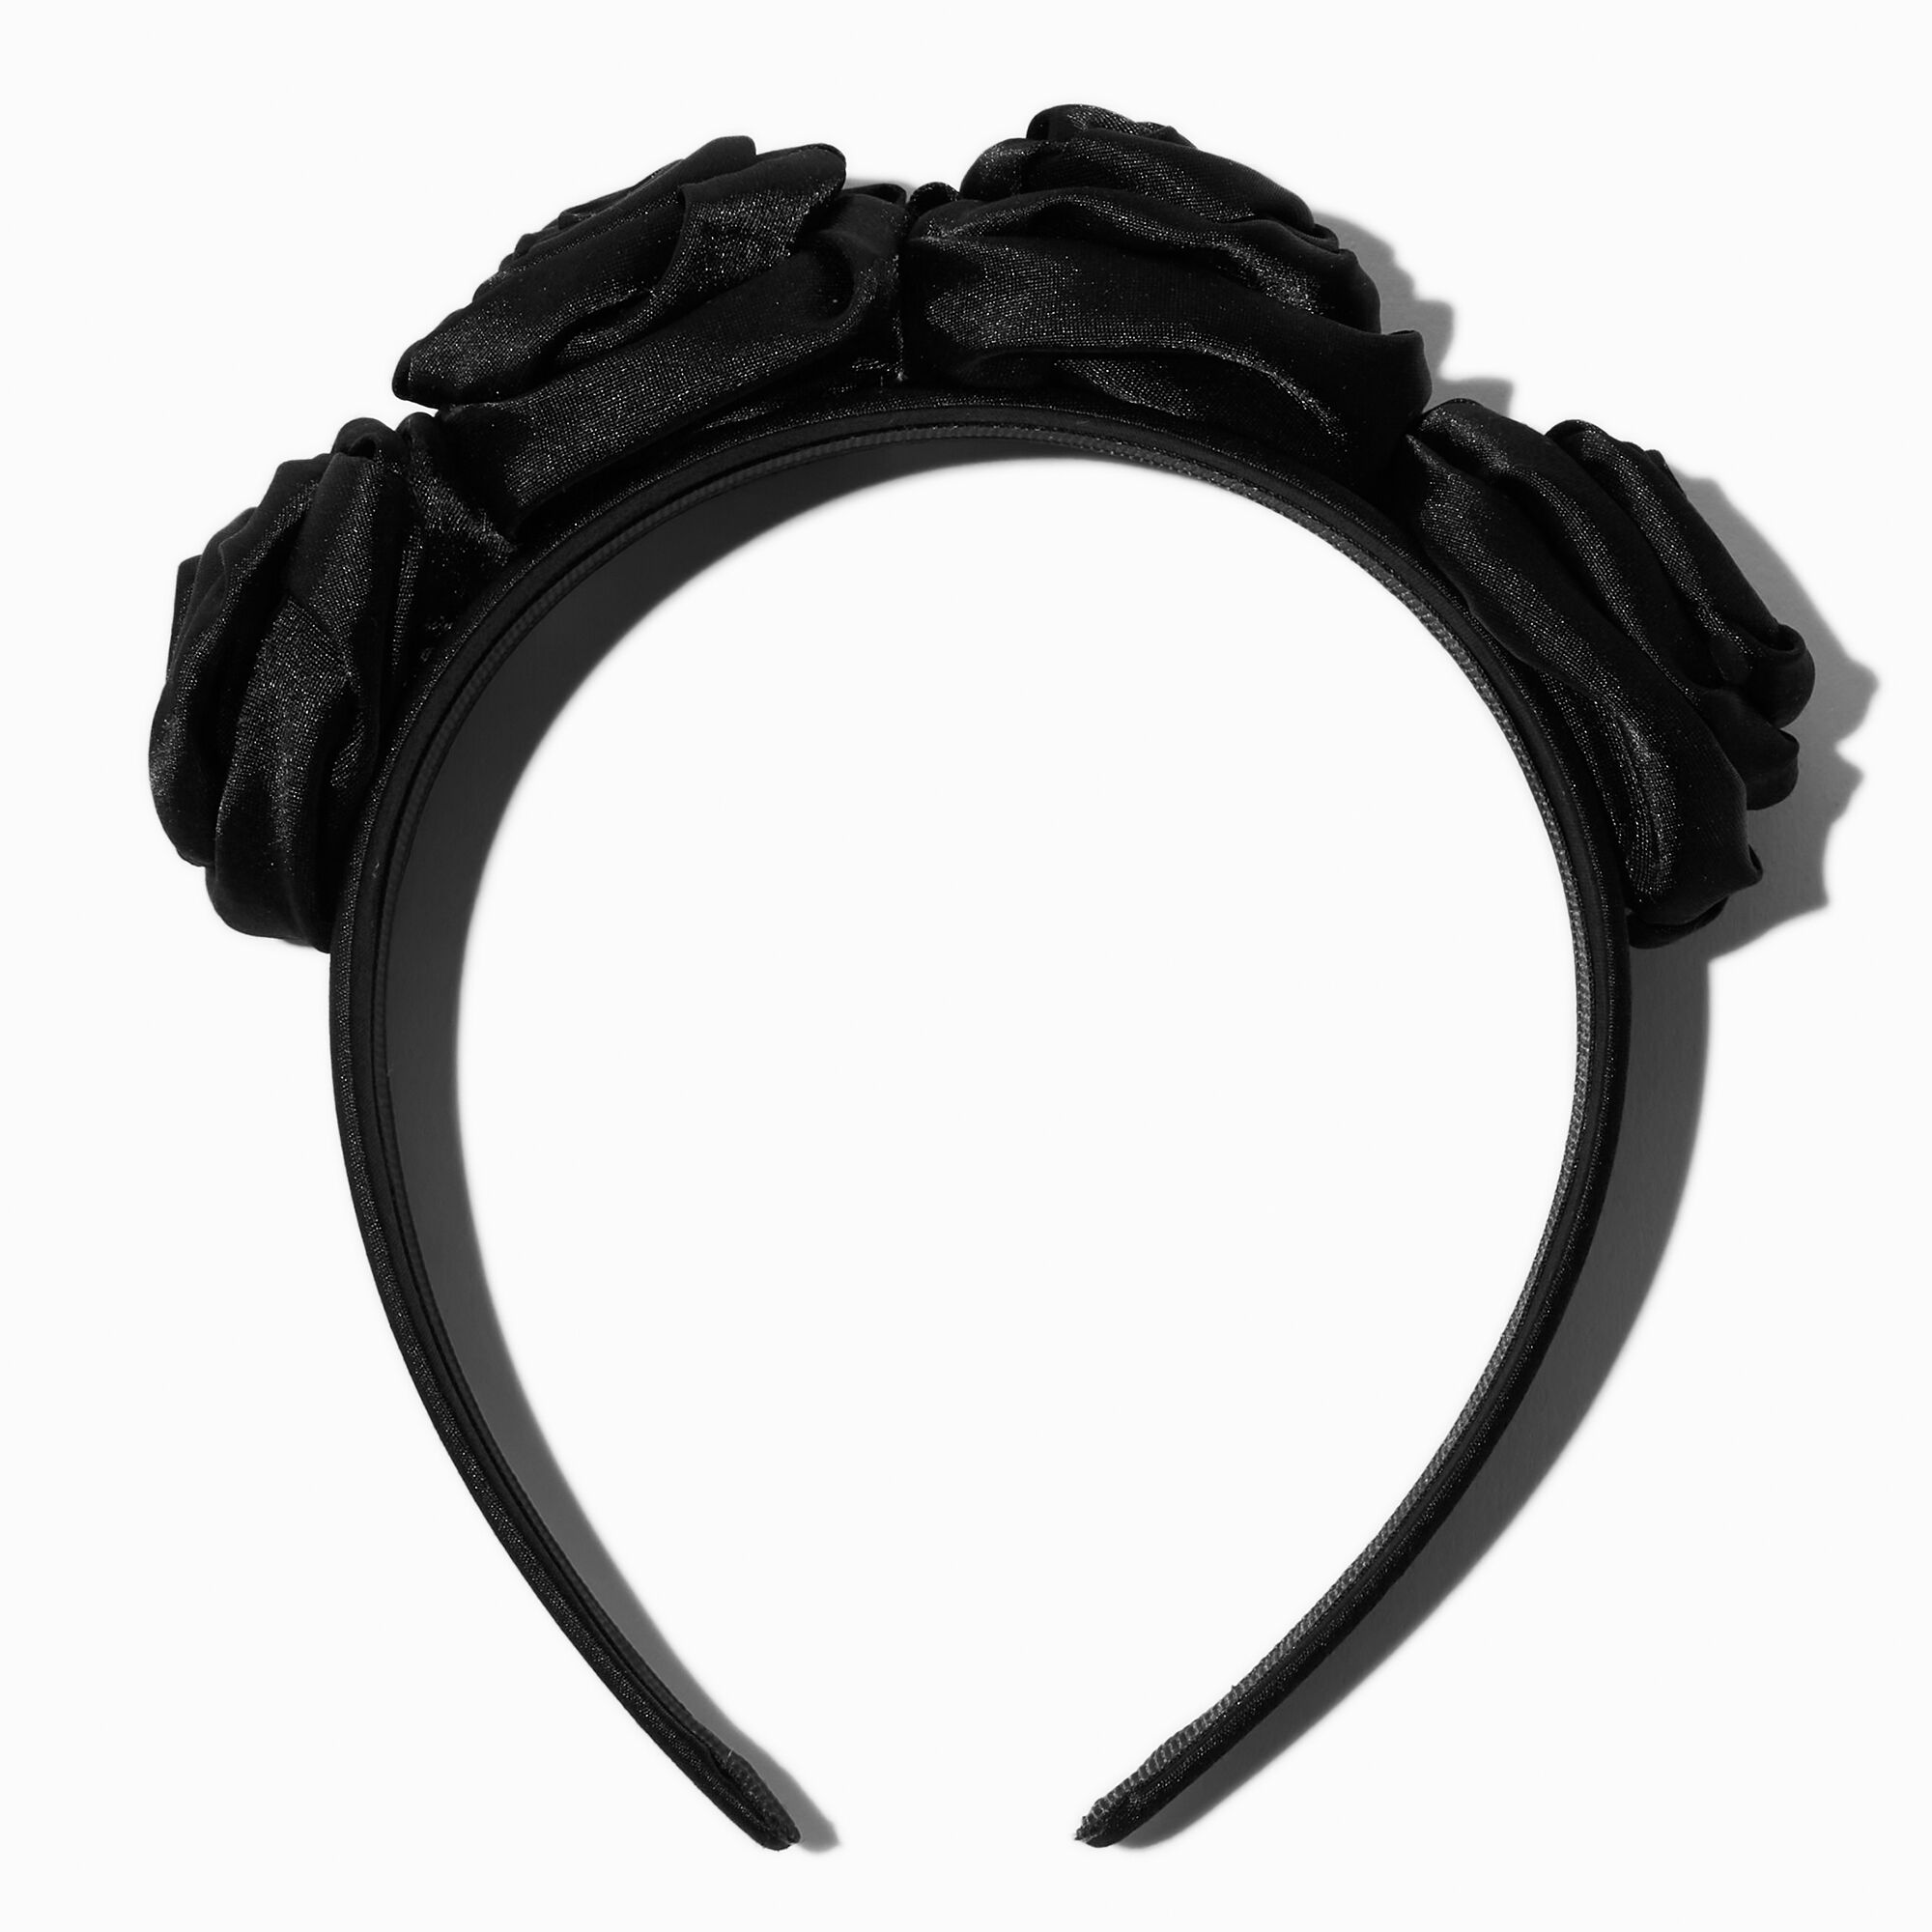 View Claires Roses Flower Crown Headband Black information